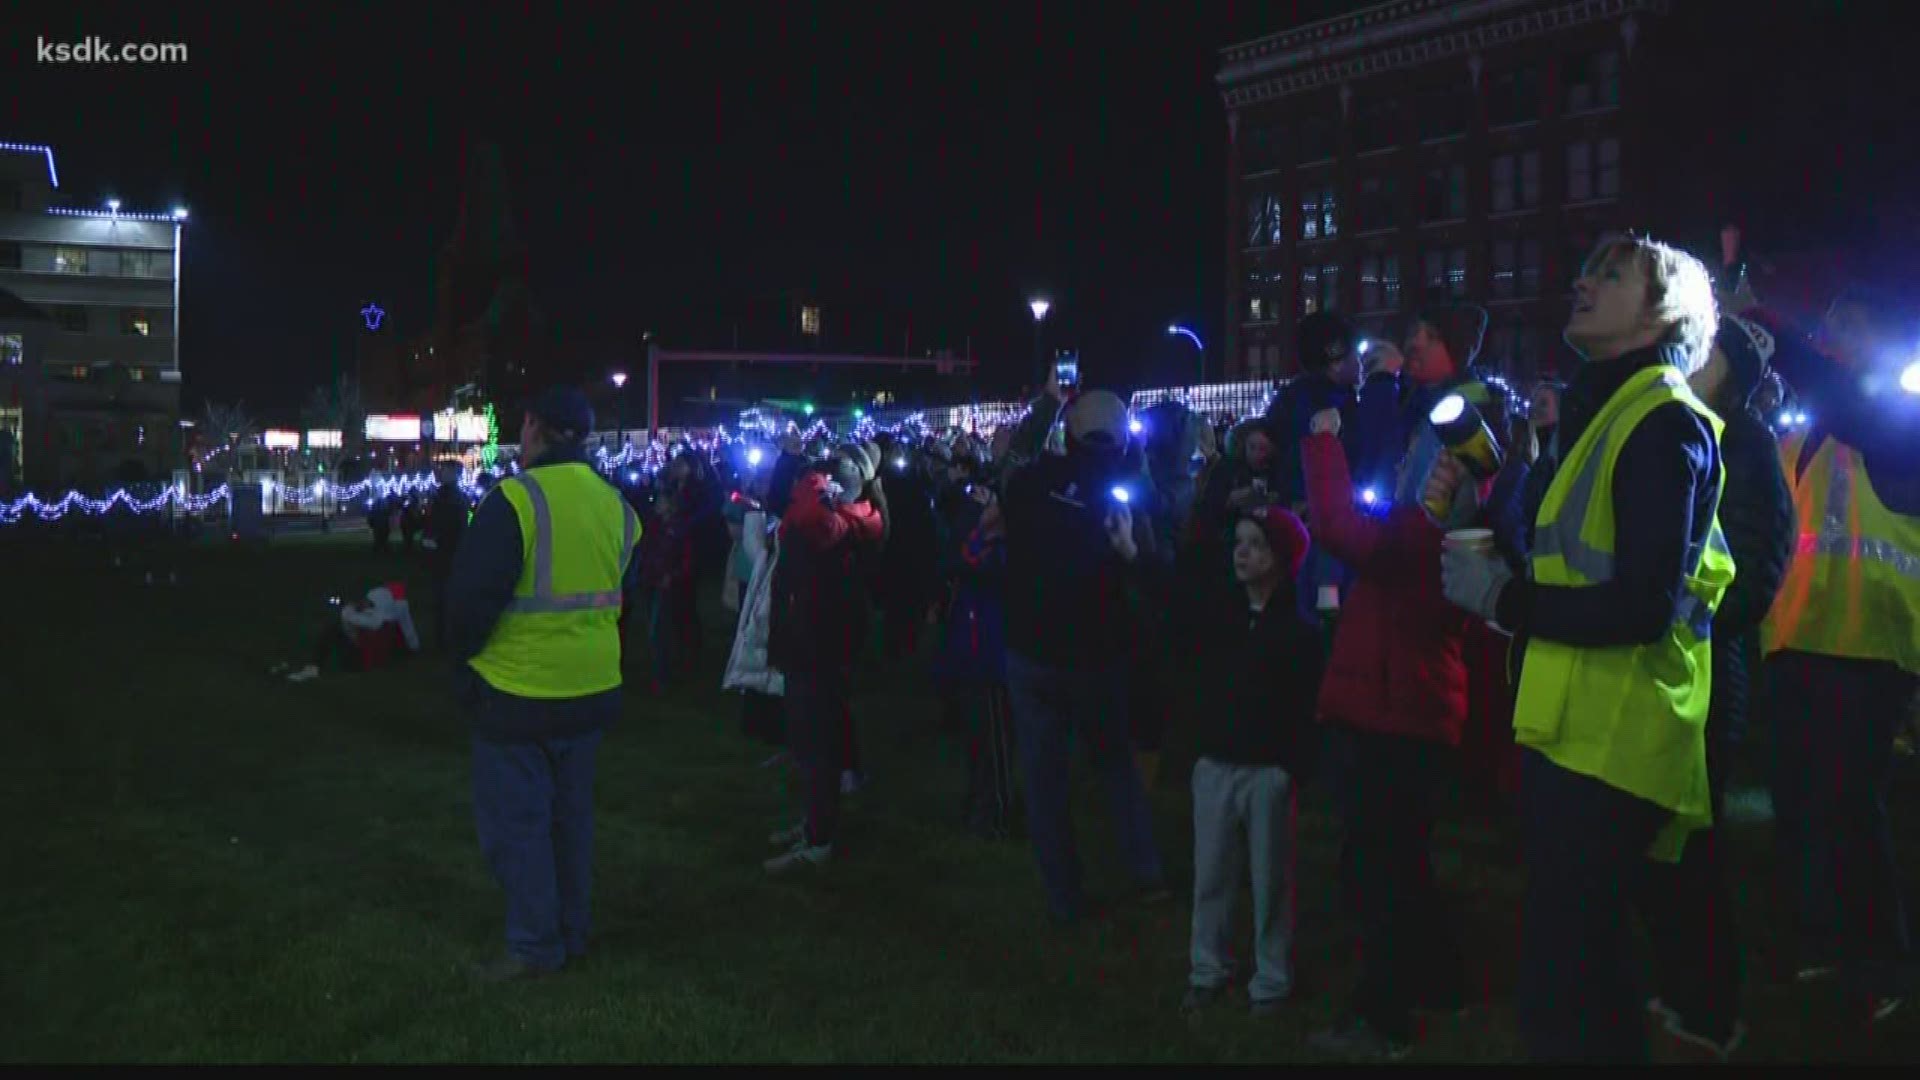 The community is invited for another Light Up Glennon event on Dec. 17!